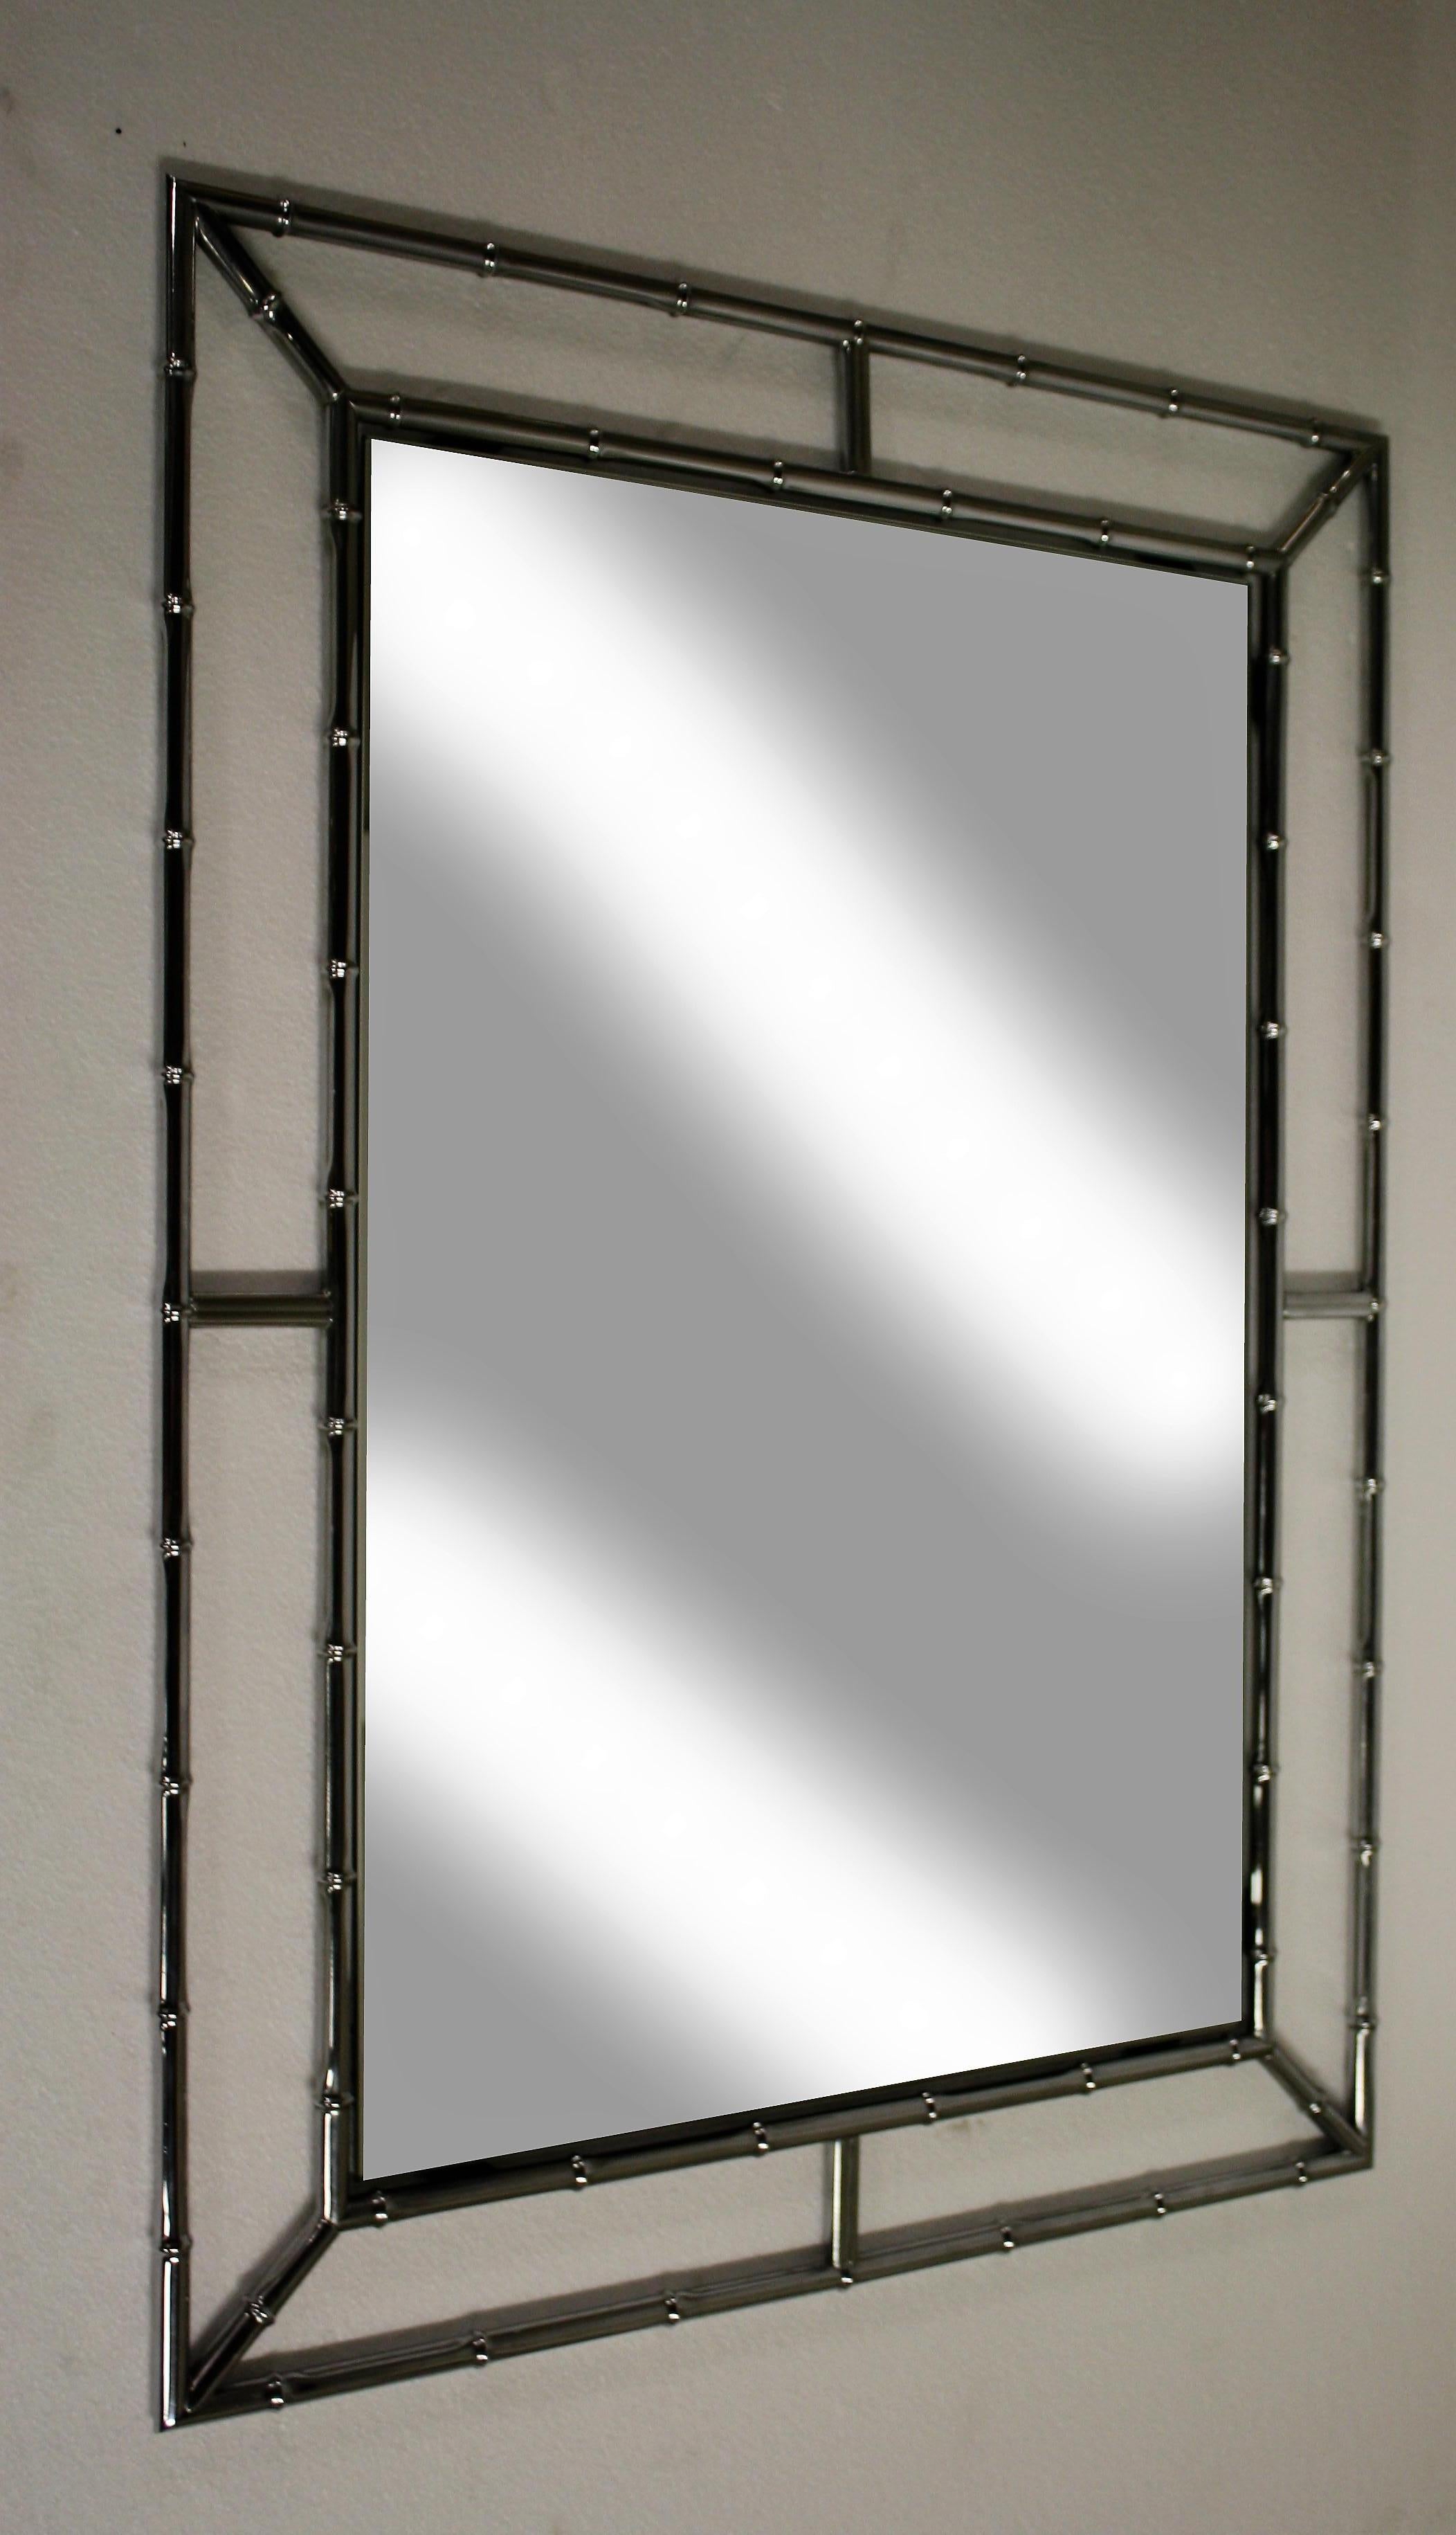 Chrome faux bamboo mirror.

Good condition, slight patina.

France, 1960s.

Dimensions:
Height 103cm/40.55